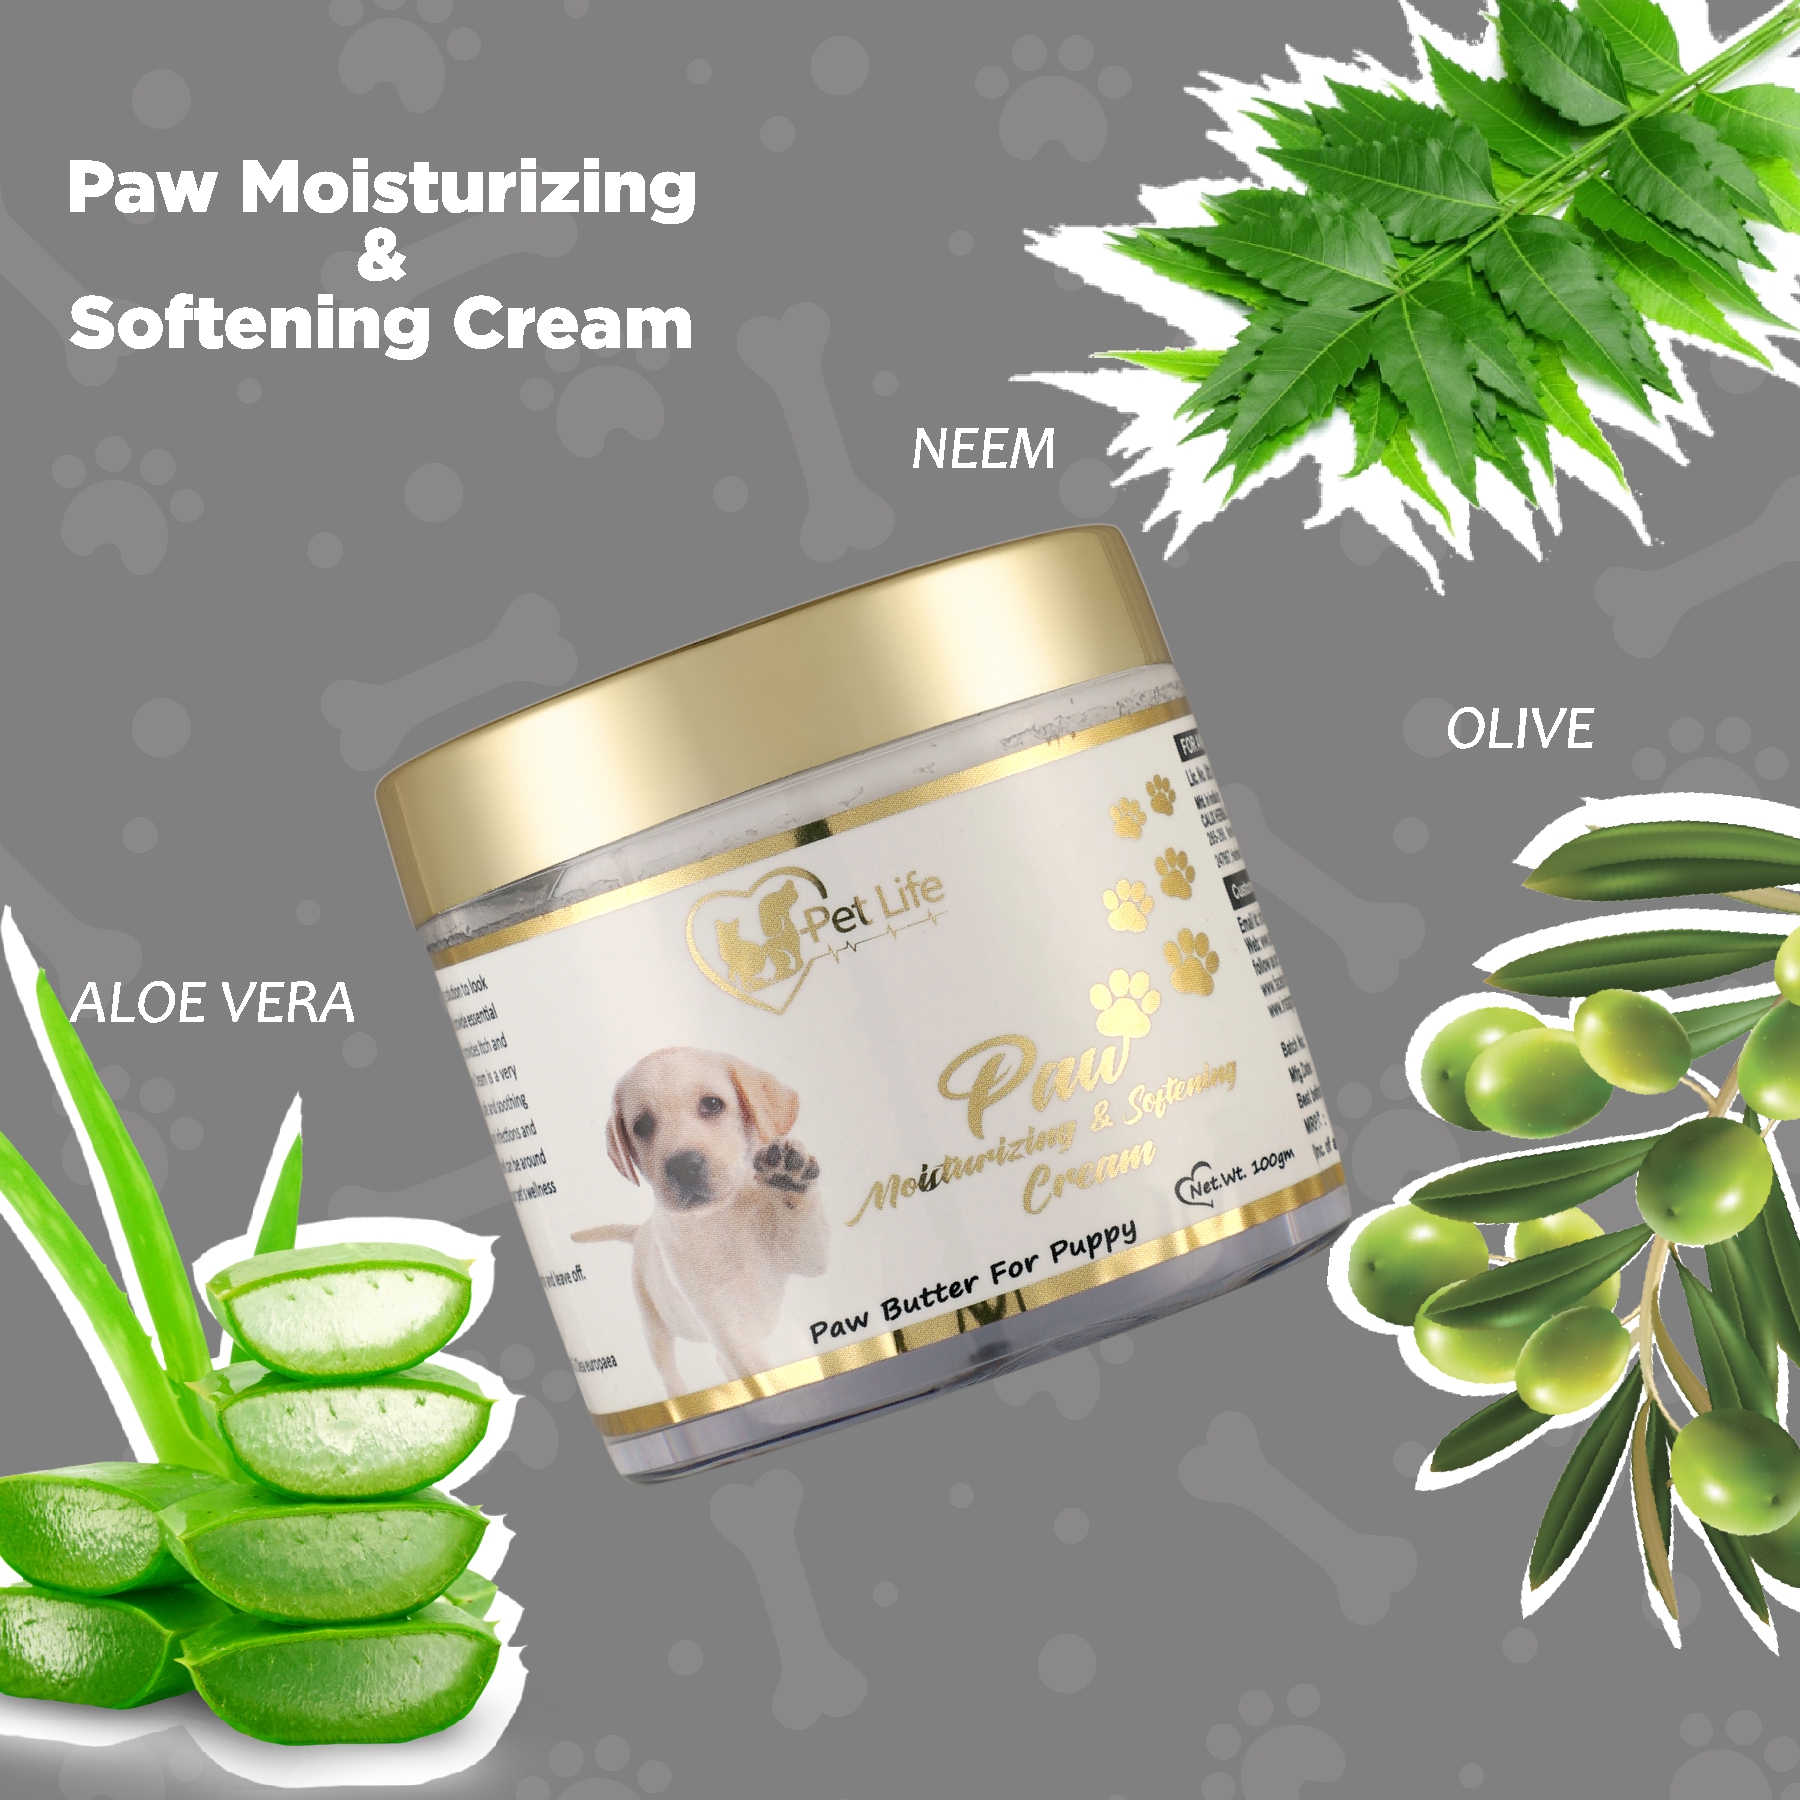 Organic Paw Moisturizing & Softening Cream For Puppy Cracked & Chapped Paws|